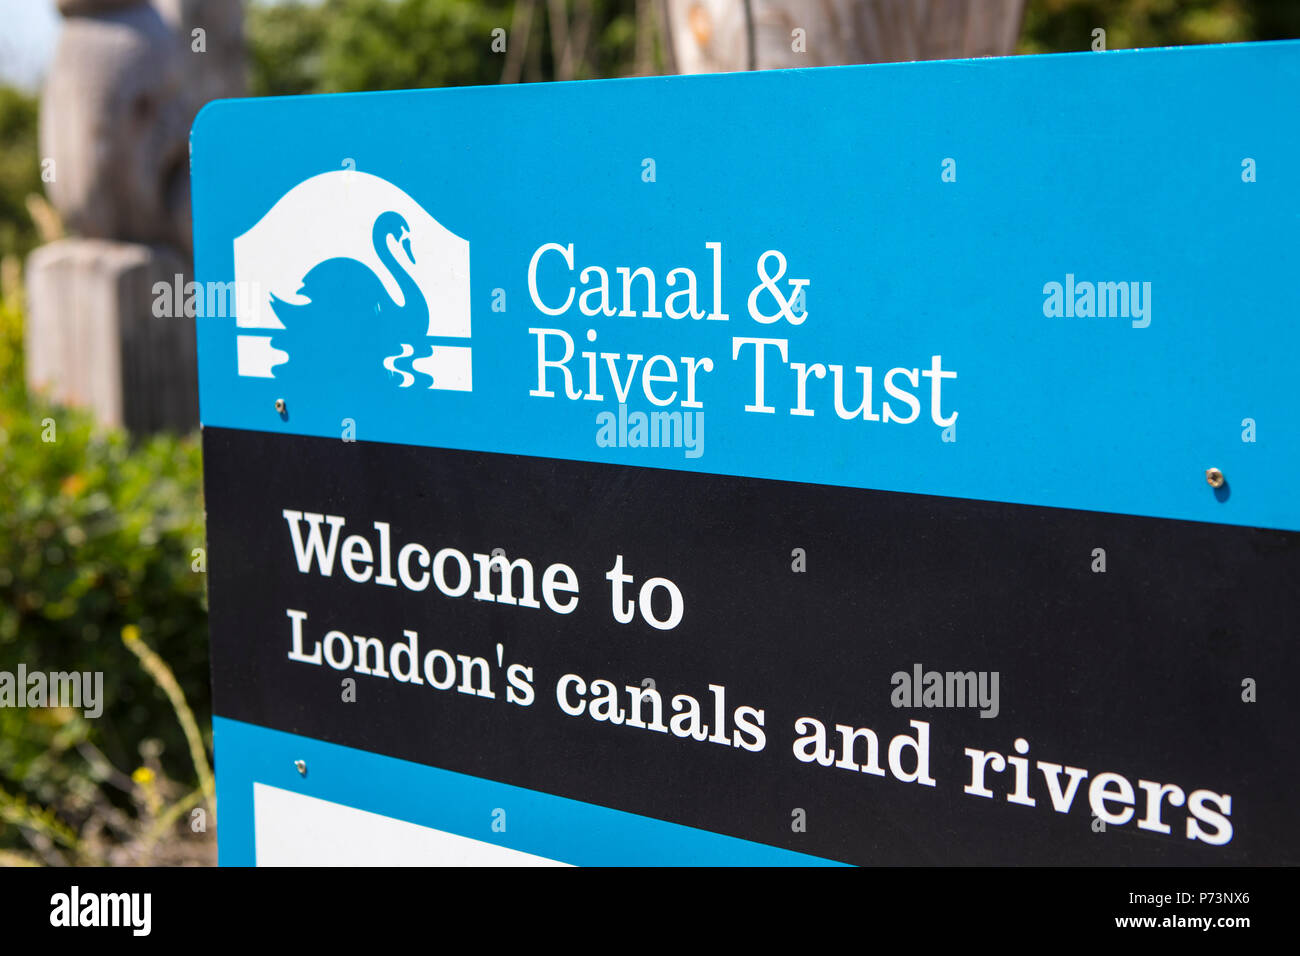 LONDON, UK - JULY 3RD 2018: A sign by the Canal and River Trust on the River Lea at Stonebridge Lock in Tottenham, London, on 3rd July 2018. Stock Photo